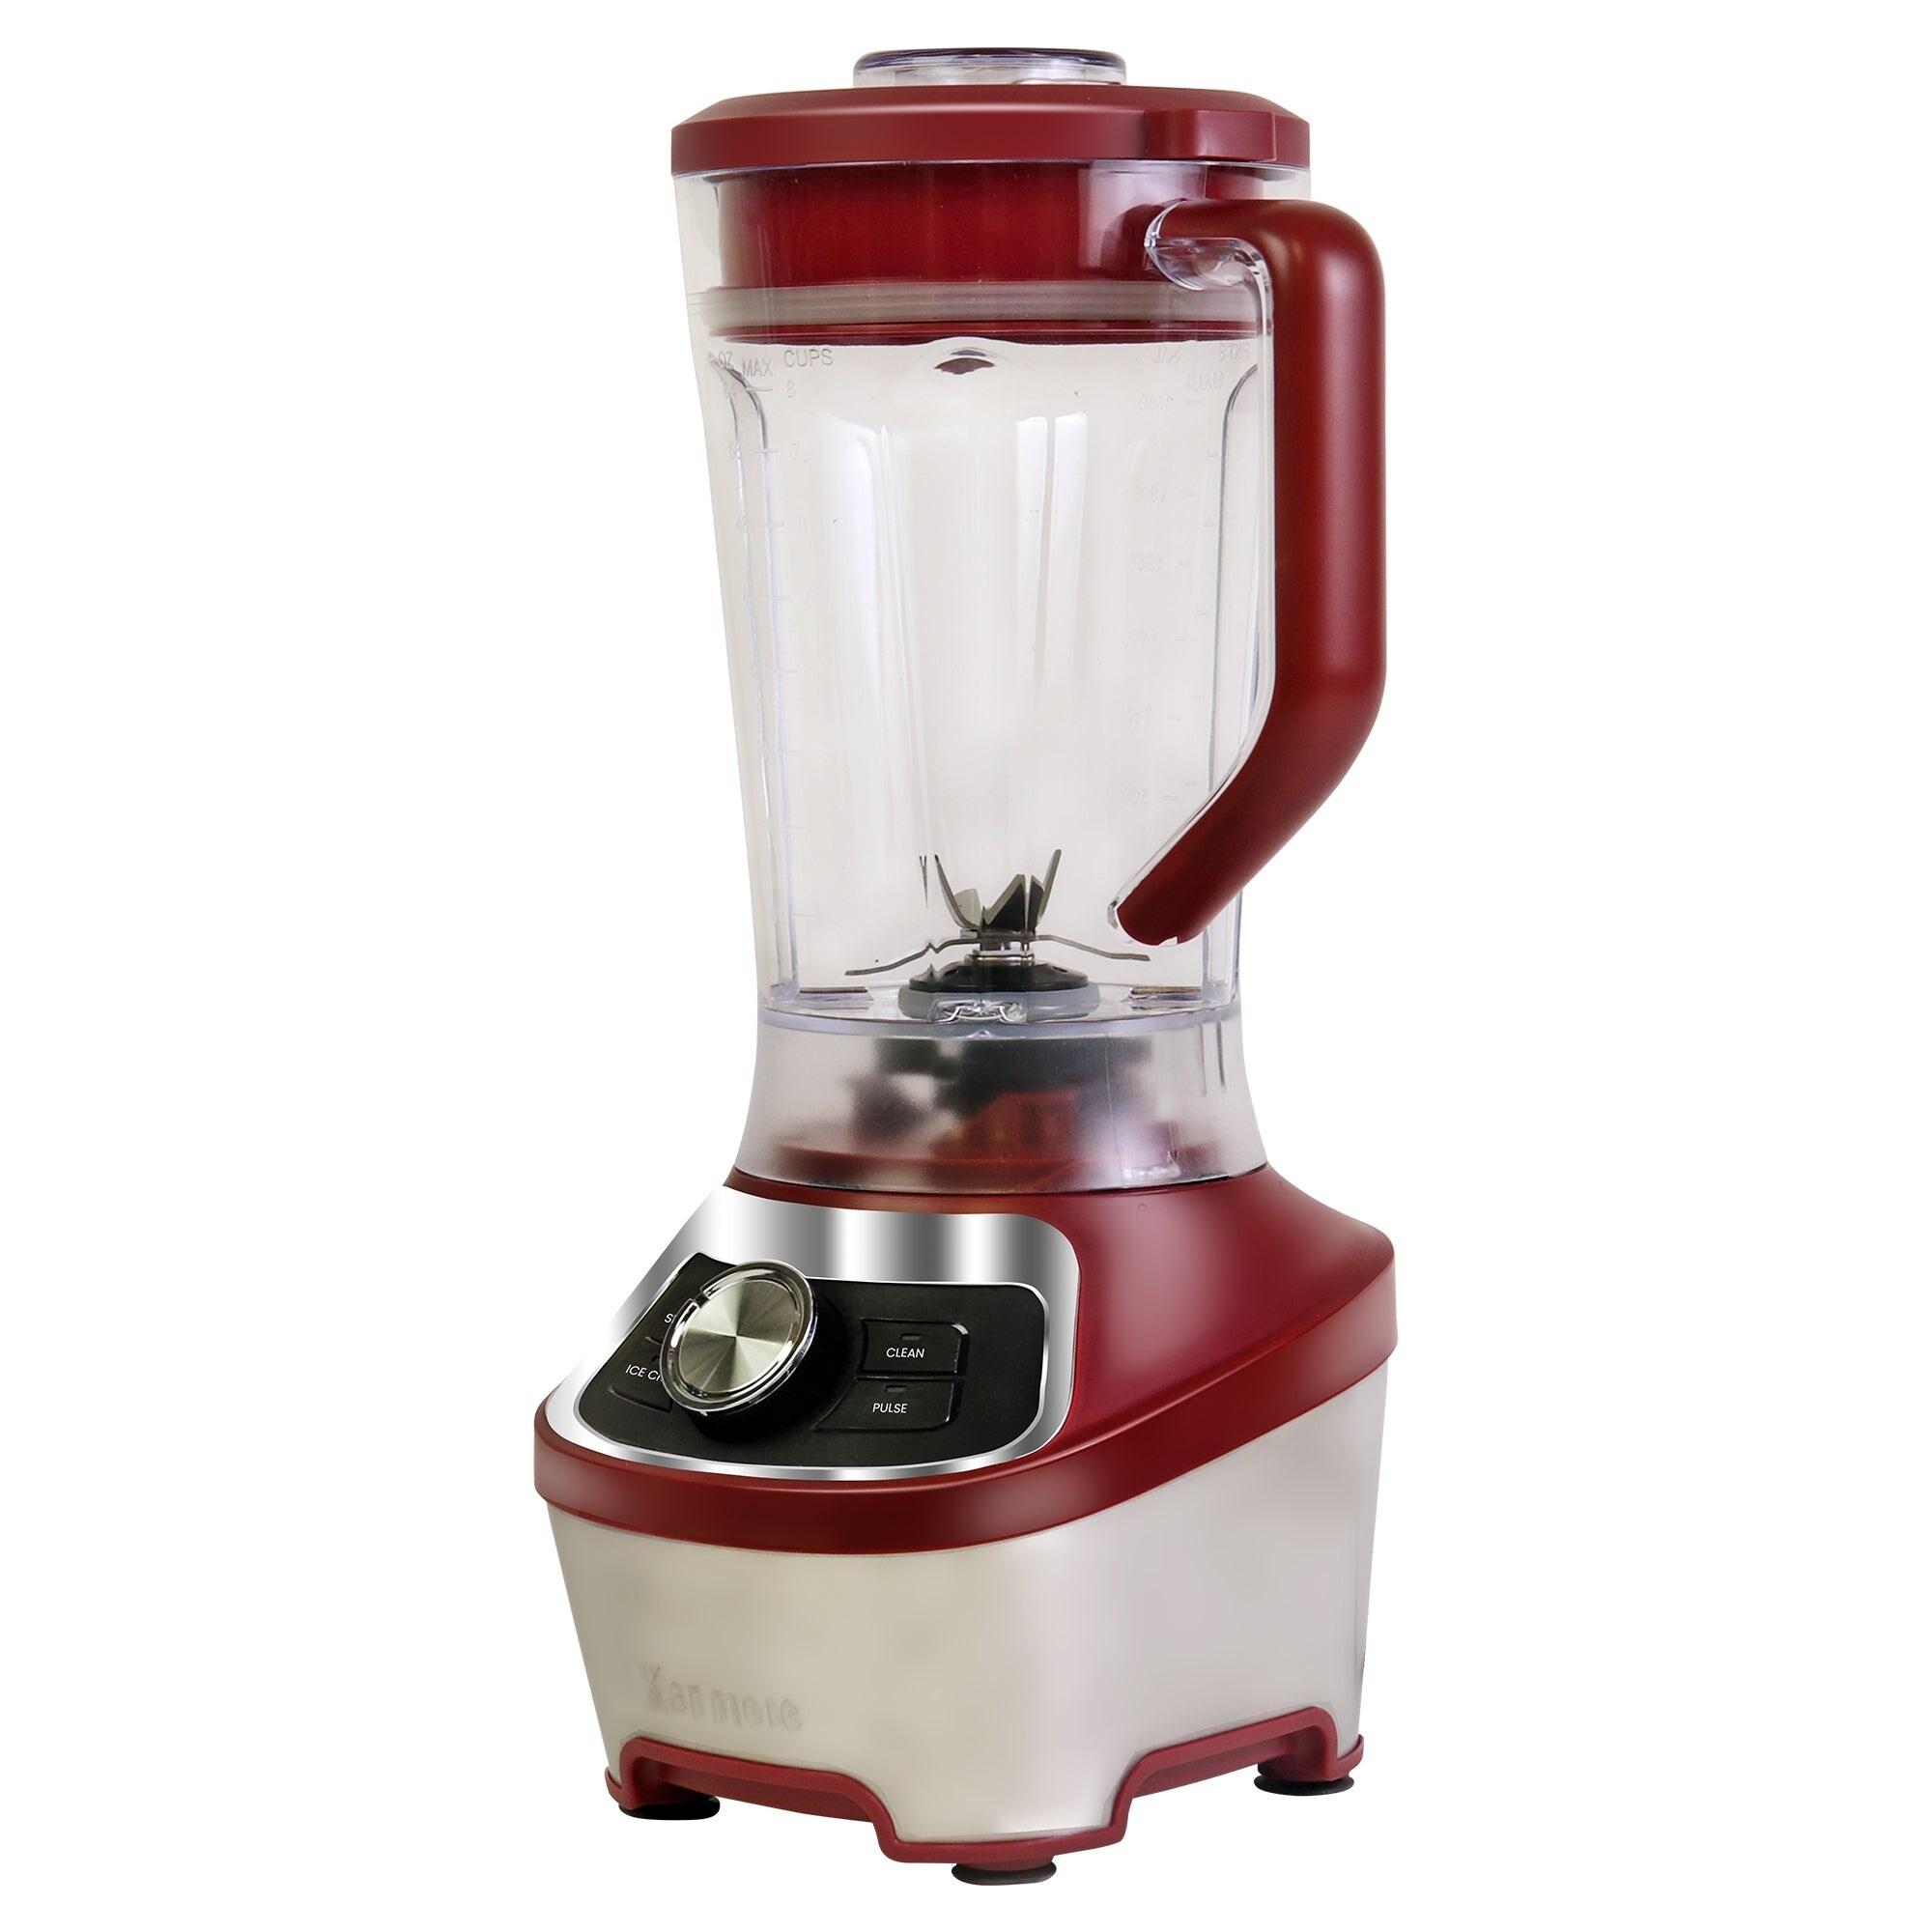 https://ak1.ostkcdn.com/images/products/is/images/direct/90fab4ee77844d0571f35330b7d94a95ede3a6a2/Kenmore-64-oz-Stand-Blender%2C-1200W%2C-Smoothie%2C-Ice-Crush%2C-Self-Clean-Modes%2C-Variable-Speed%2C-Red.jpg